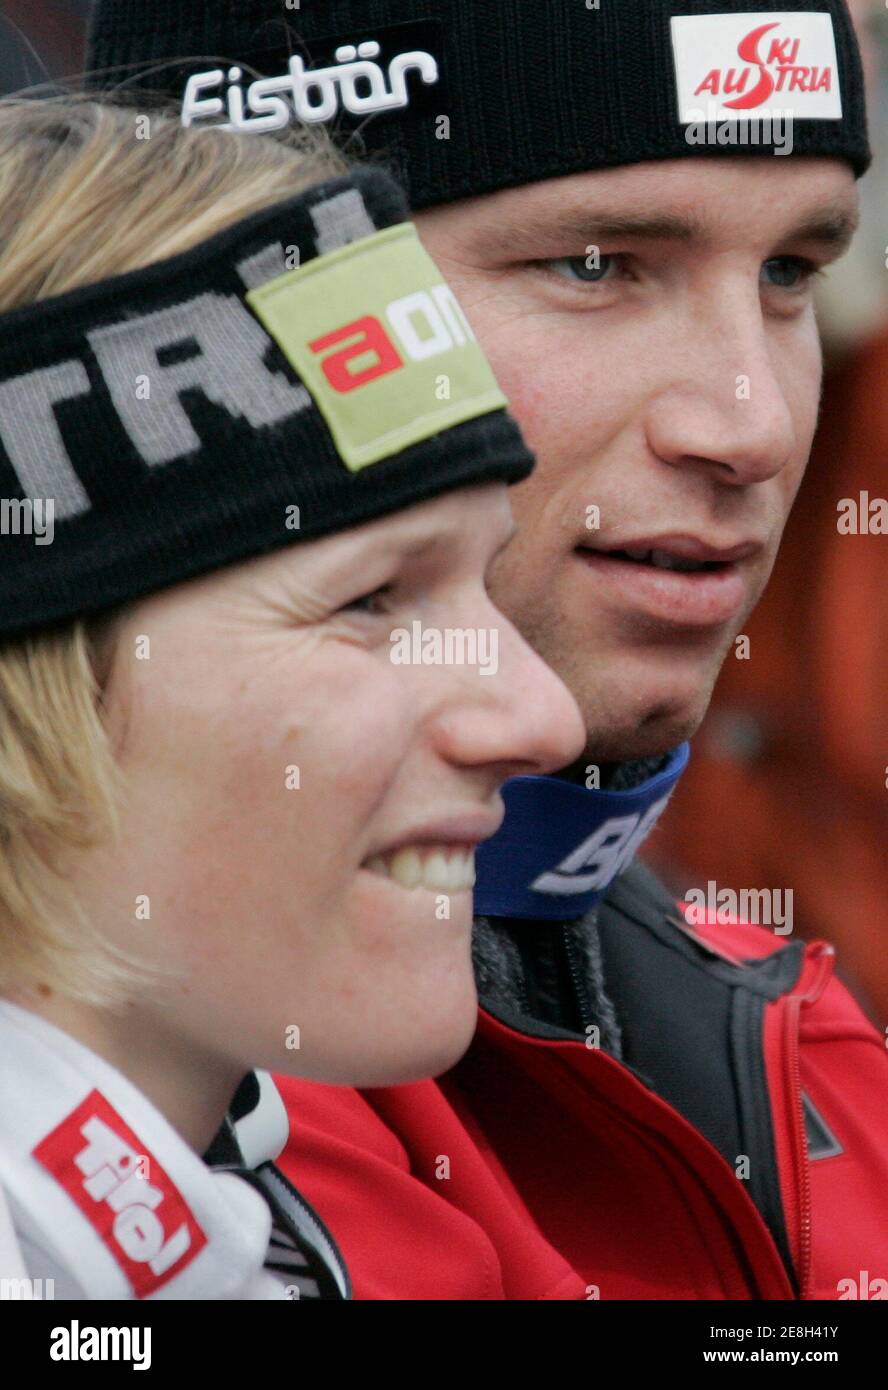 Marlies Schild of Austria (L) and Benjamin Raich of Austria wait before the prize-giving ceremony in the finish area after the season's last men's giant slalom race at the Alpine Ski World Cup Finals in Lenzerheide March 17, 2007. REUTERS/Pascal Lauener (SWITZERLAND) Stock Photo